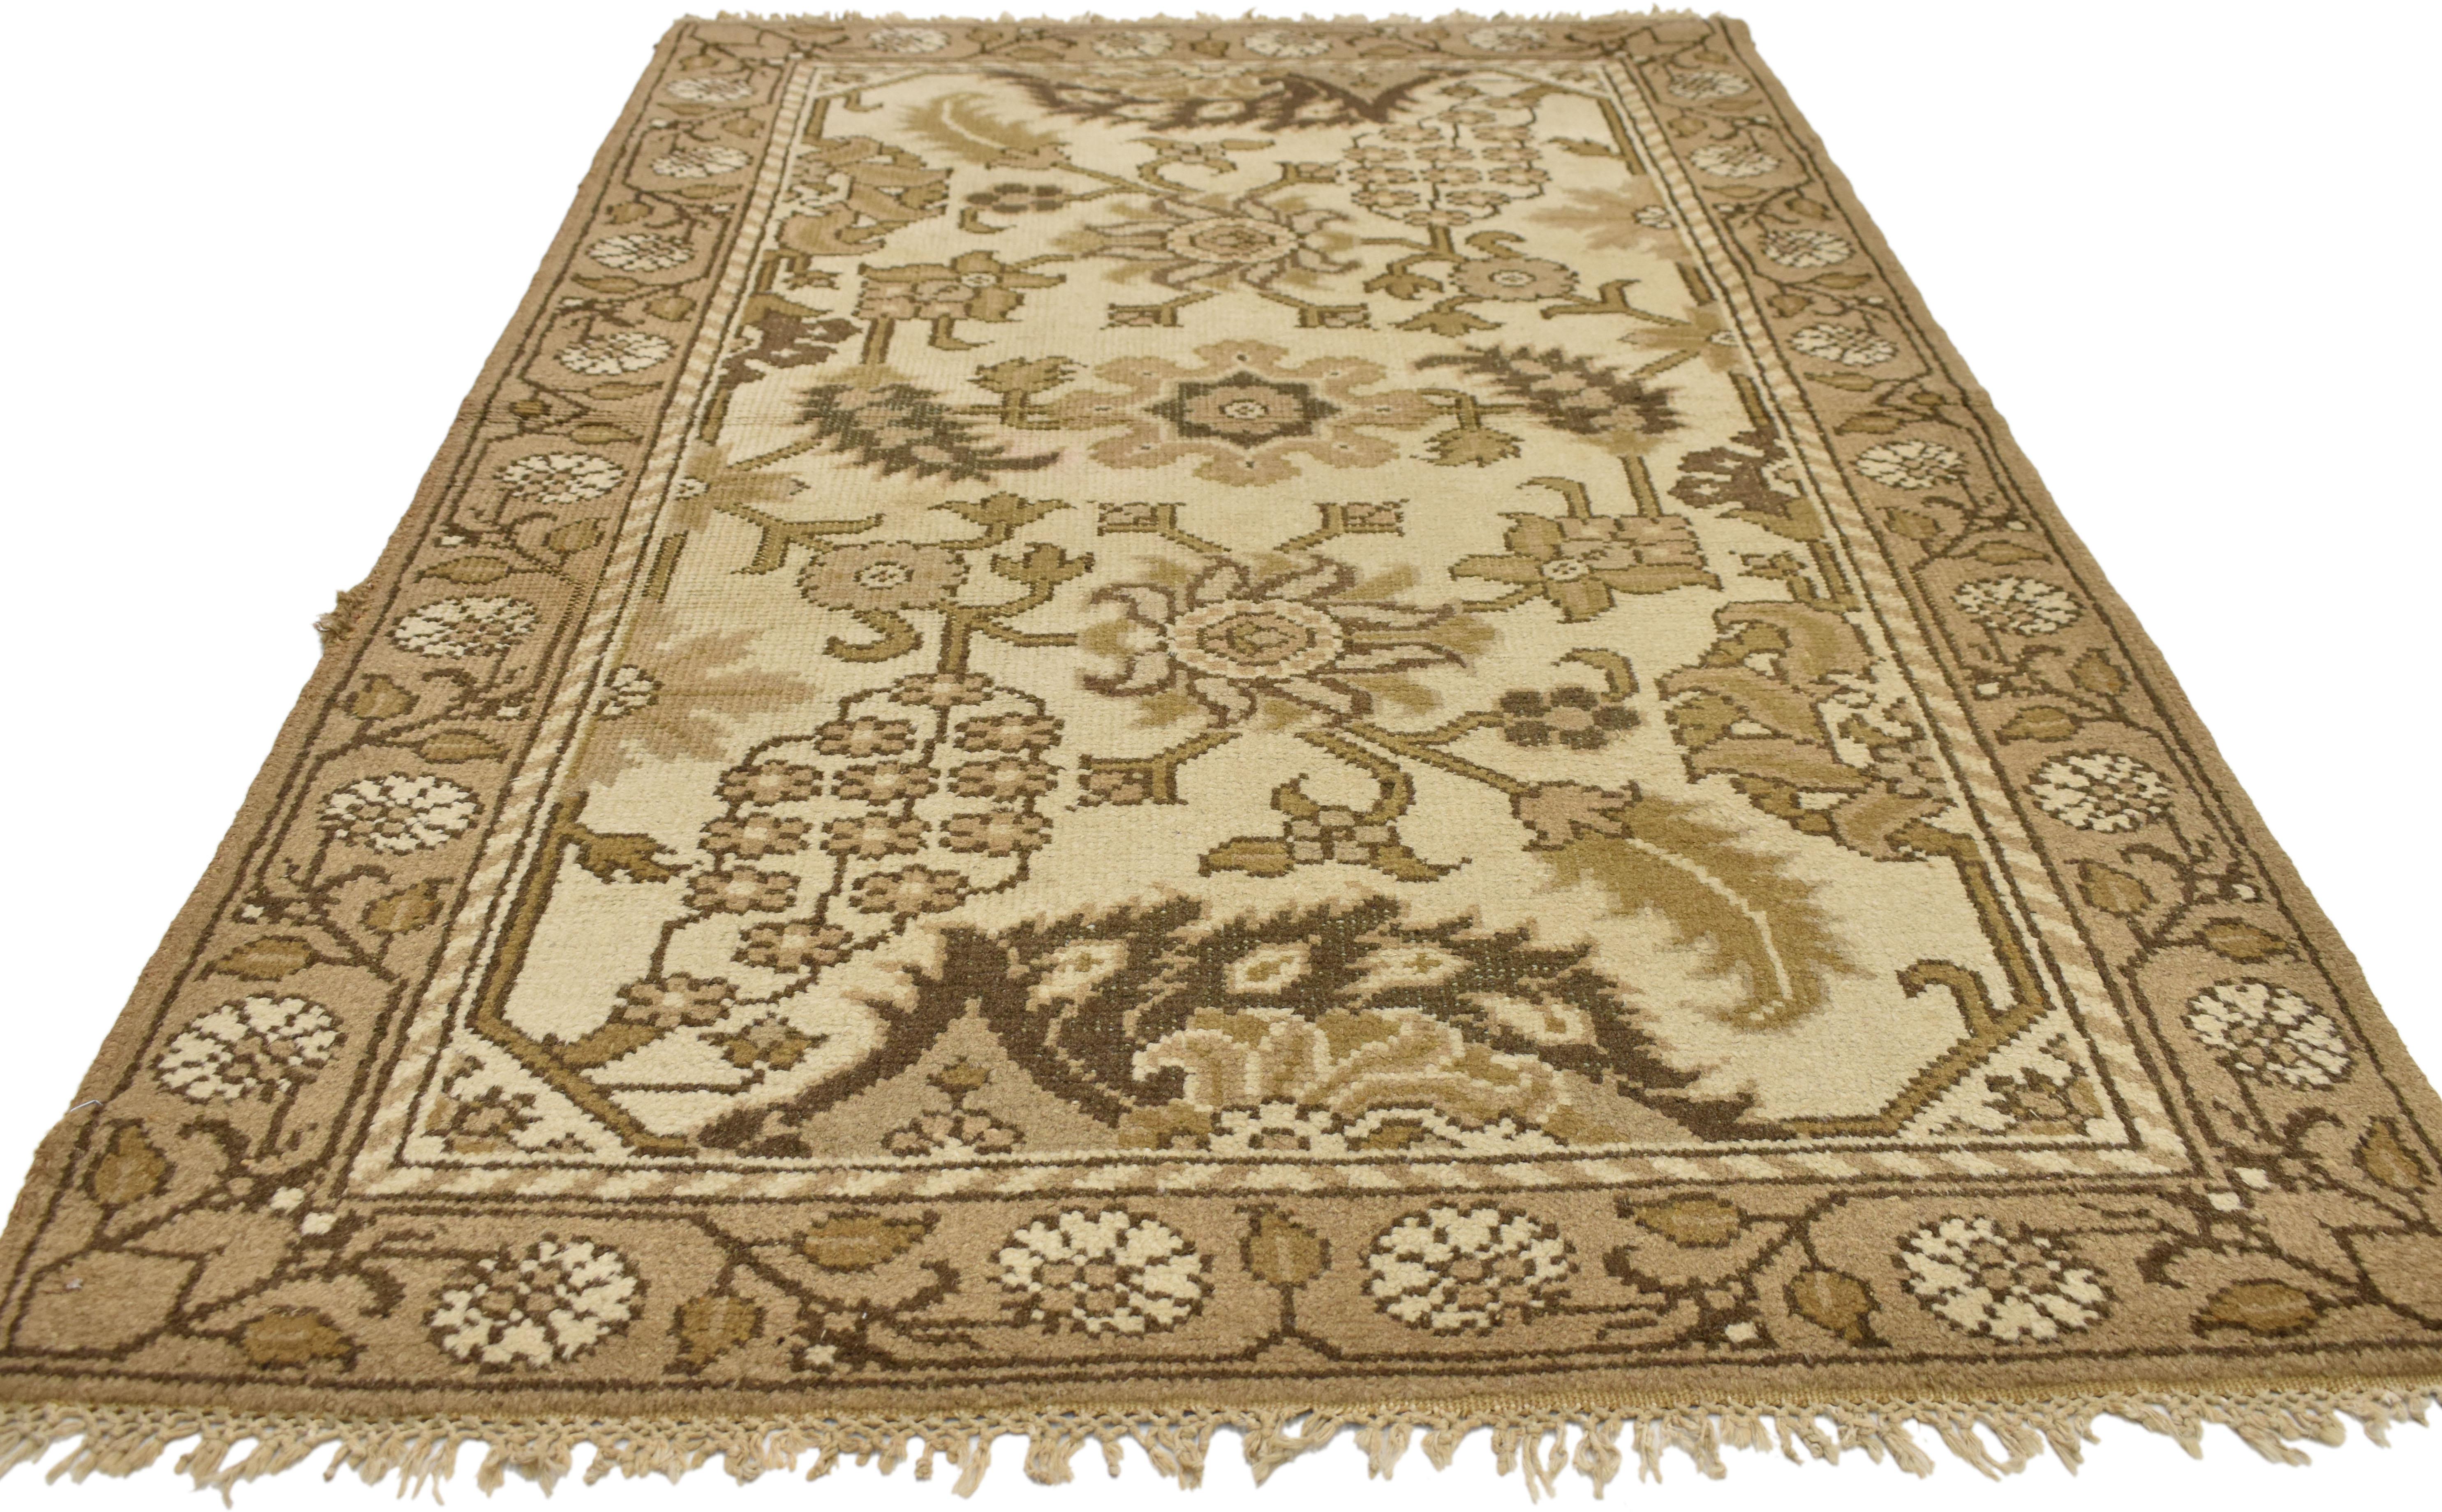 Distressed Antique Indian Agra Rug with Modern Rustic Shaker Style In Distressed Condition For Sale In Dallas, TX